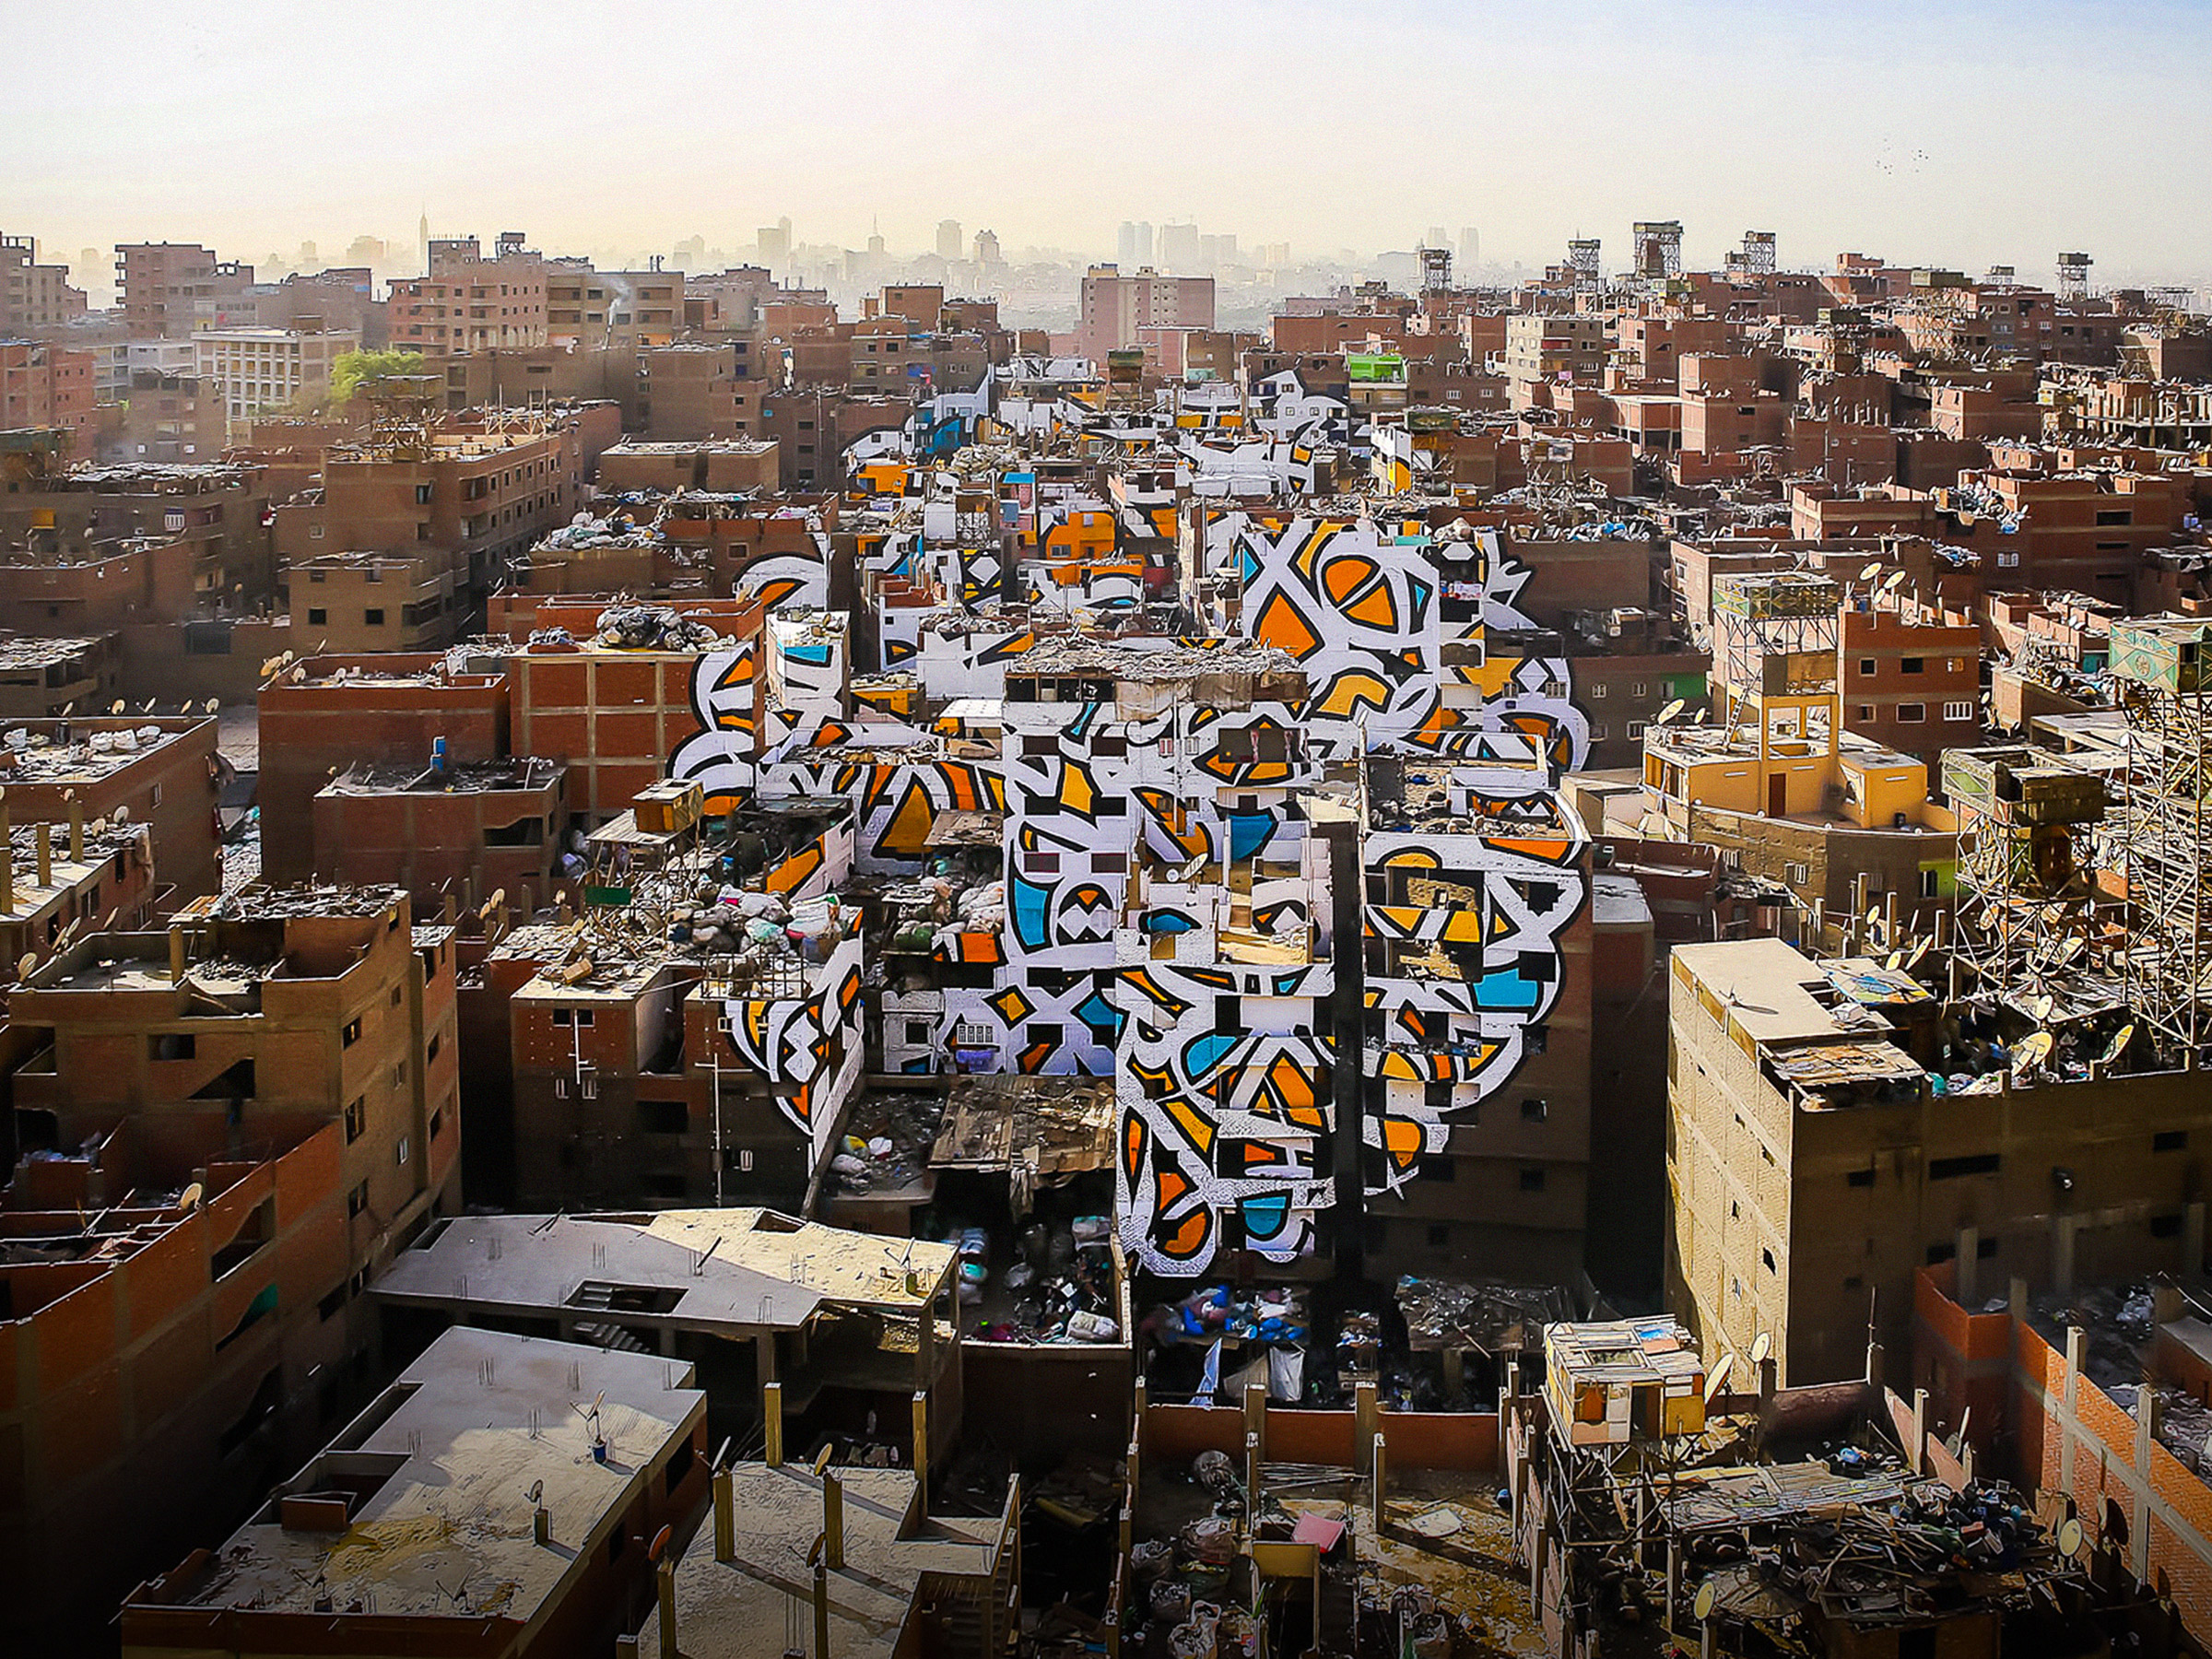 A project of peace, painted across 50 buildings